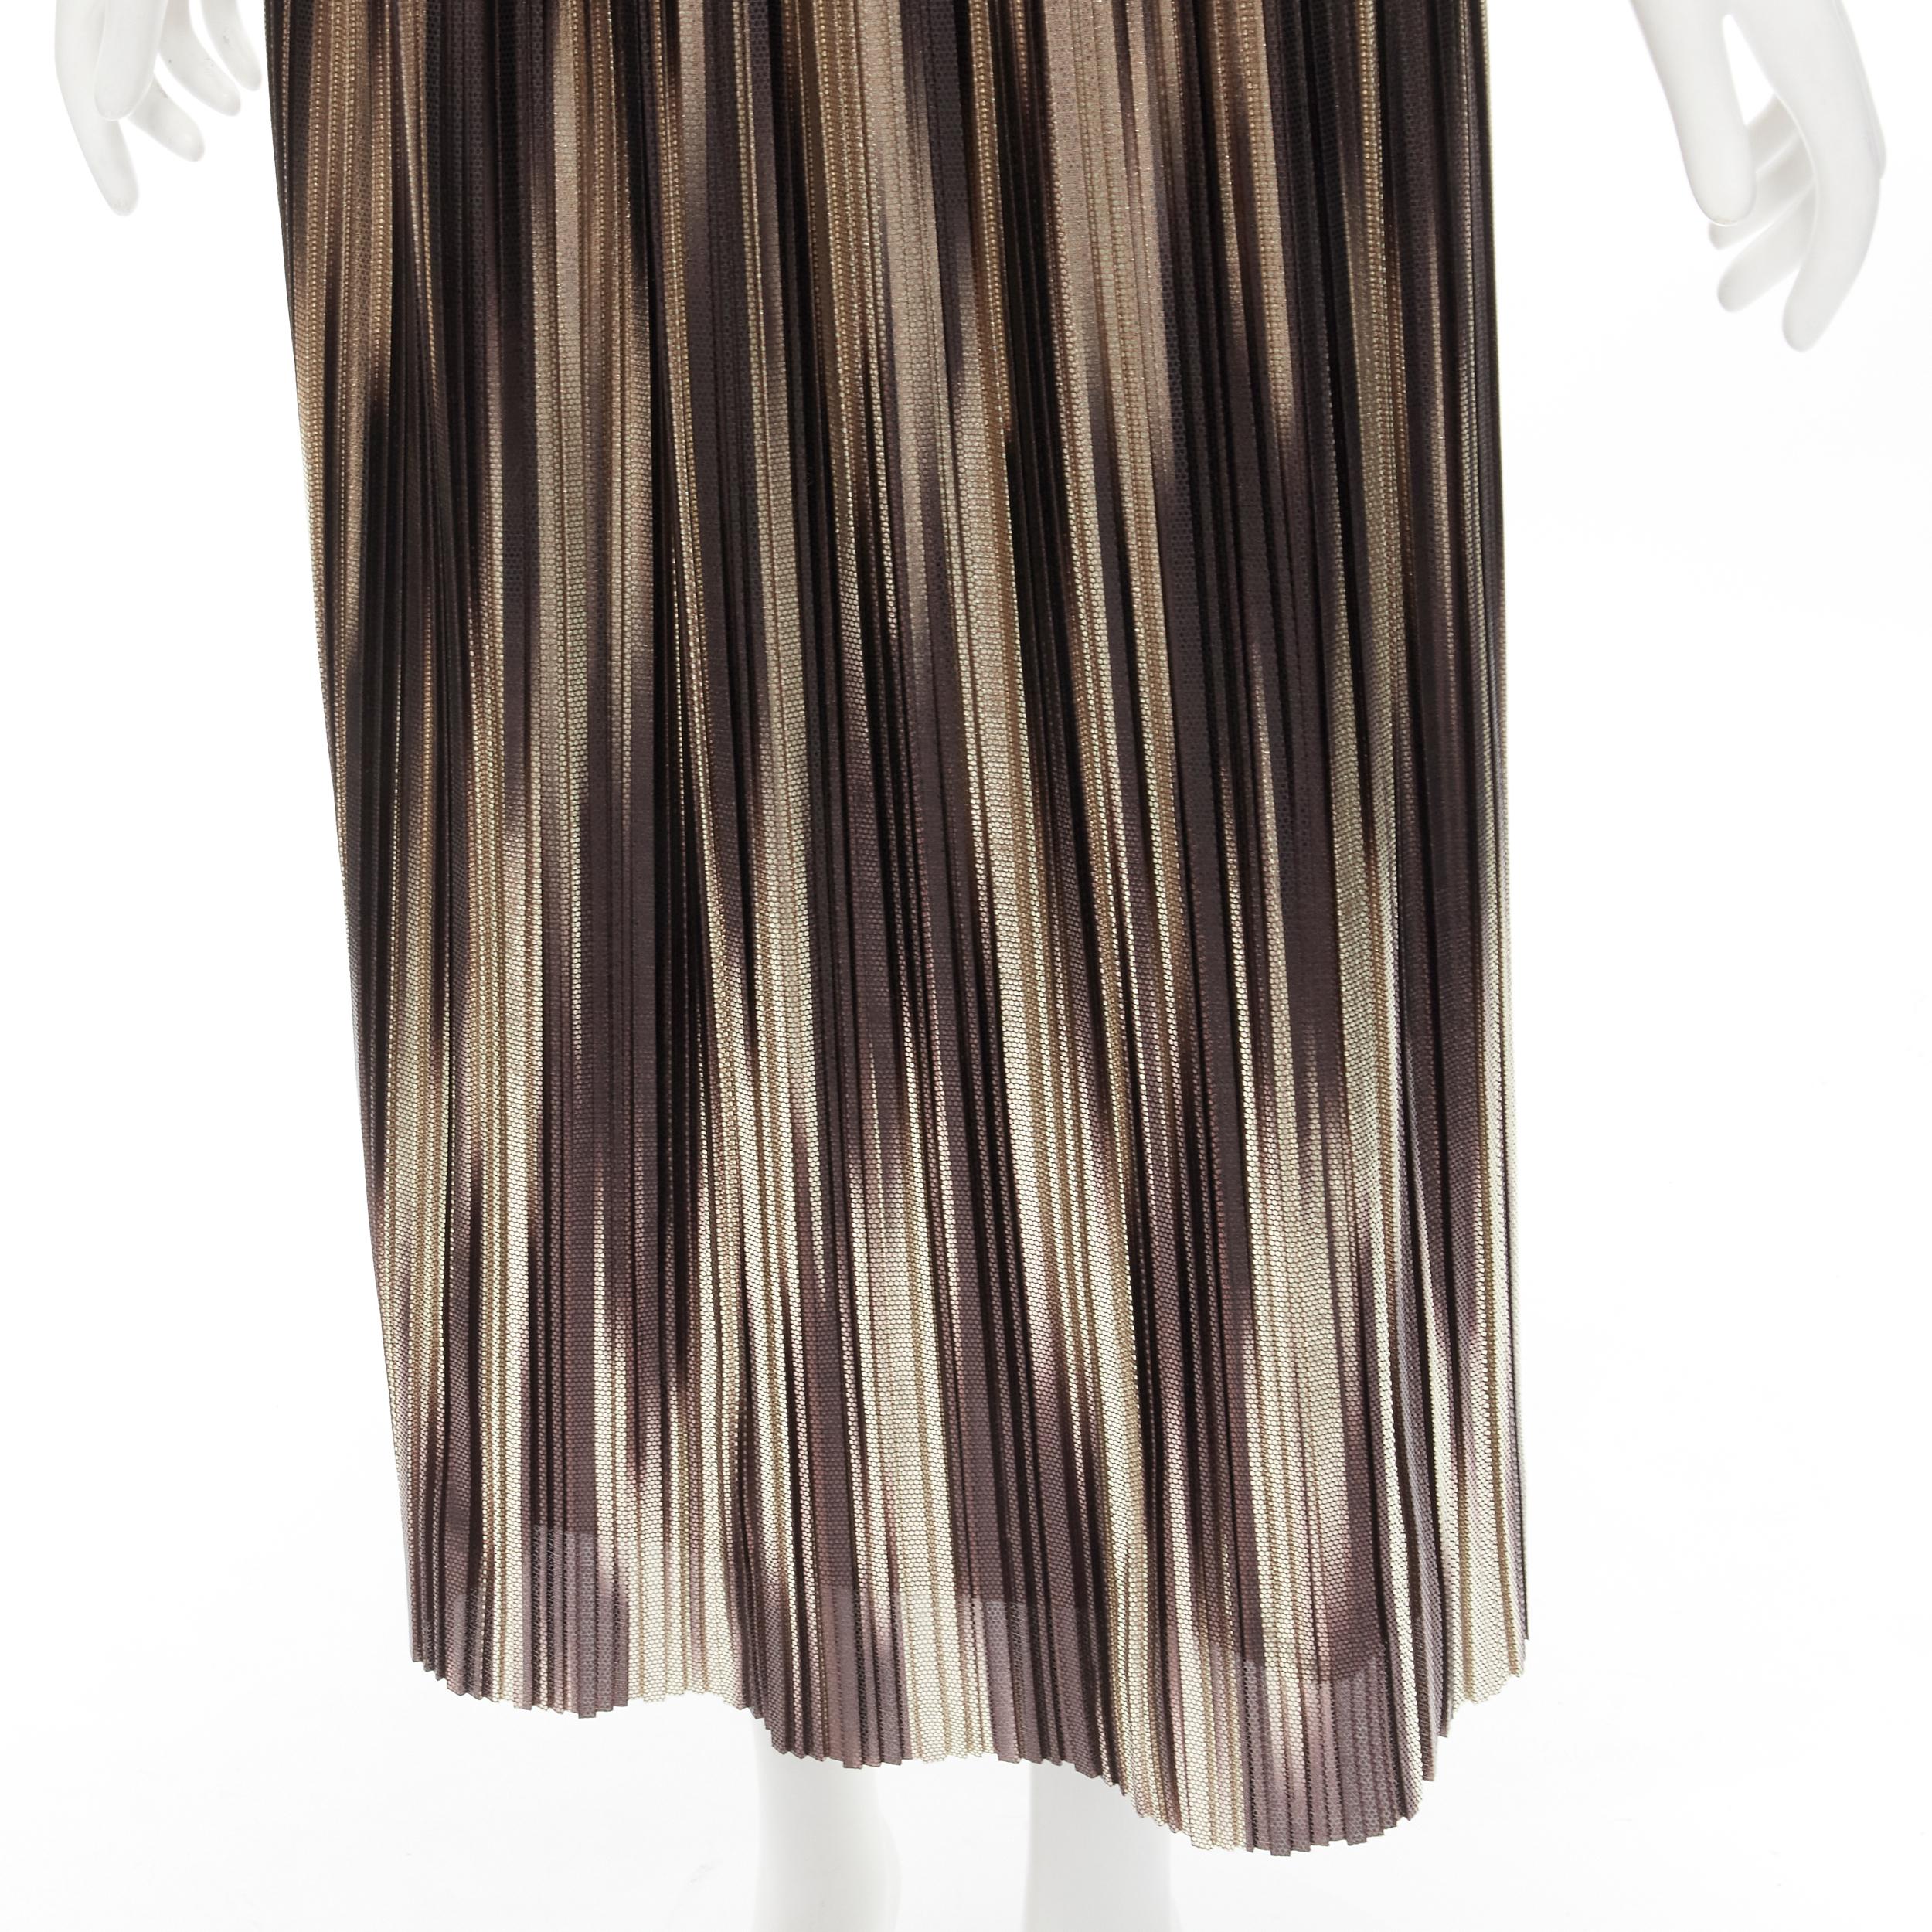 ALICE OLIVIA metallic gold pleated plisse midi skirt US8 M
Brand: Alice Olivia
Material: Polyester
Color: Gold
Pattern: Solid
Closure: Zip
Extra Detail: Stretchy waist band with zip back closure
Made in: China

CONDITION:
Condition: Excellent, this